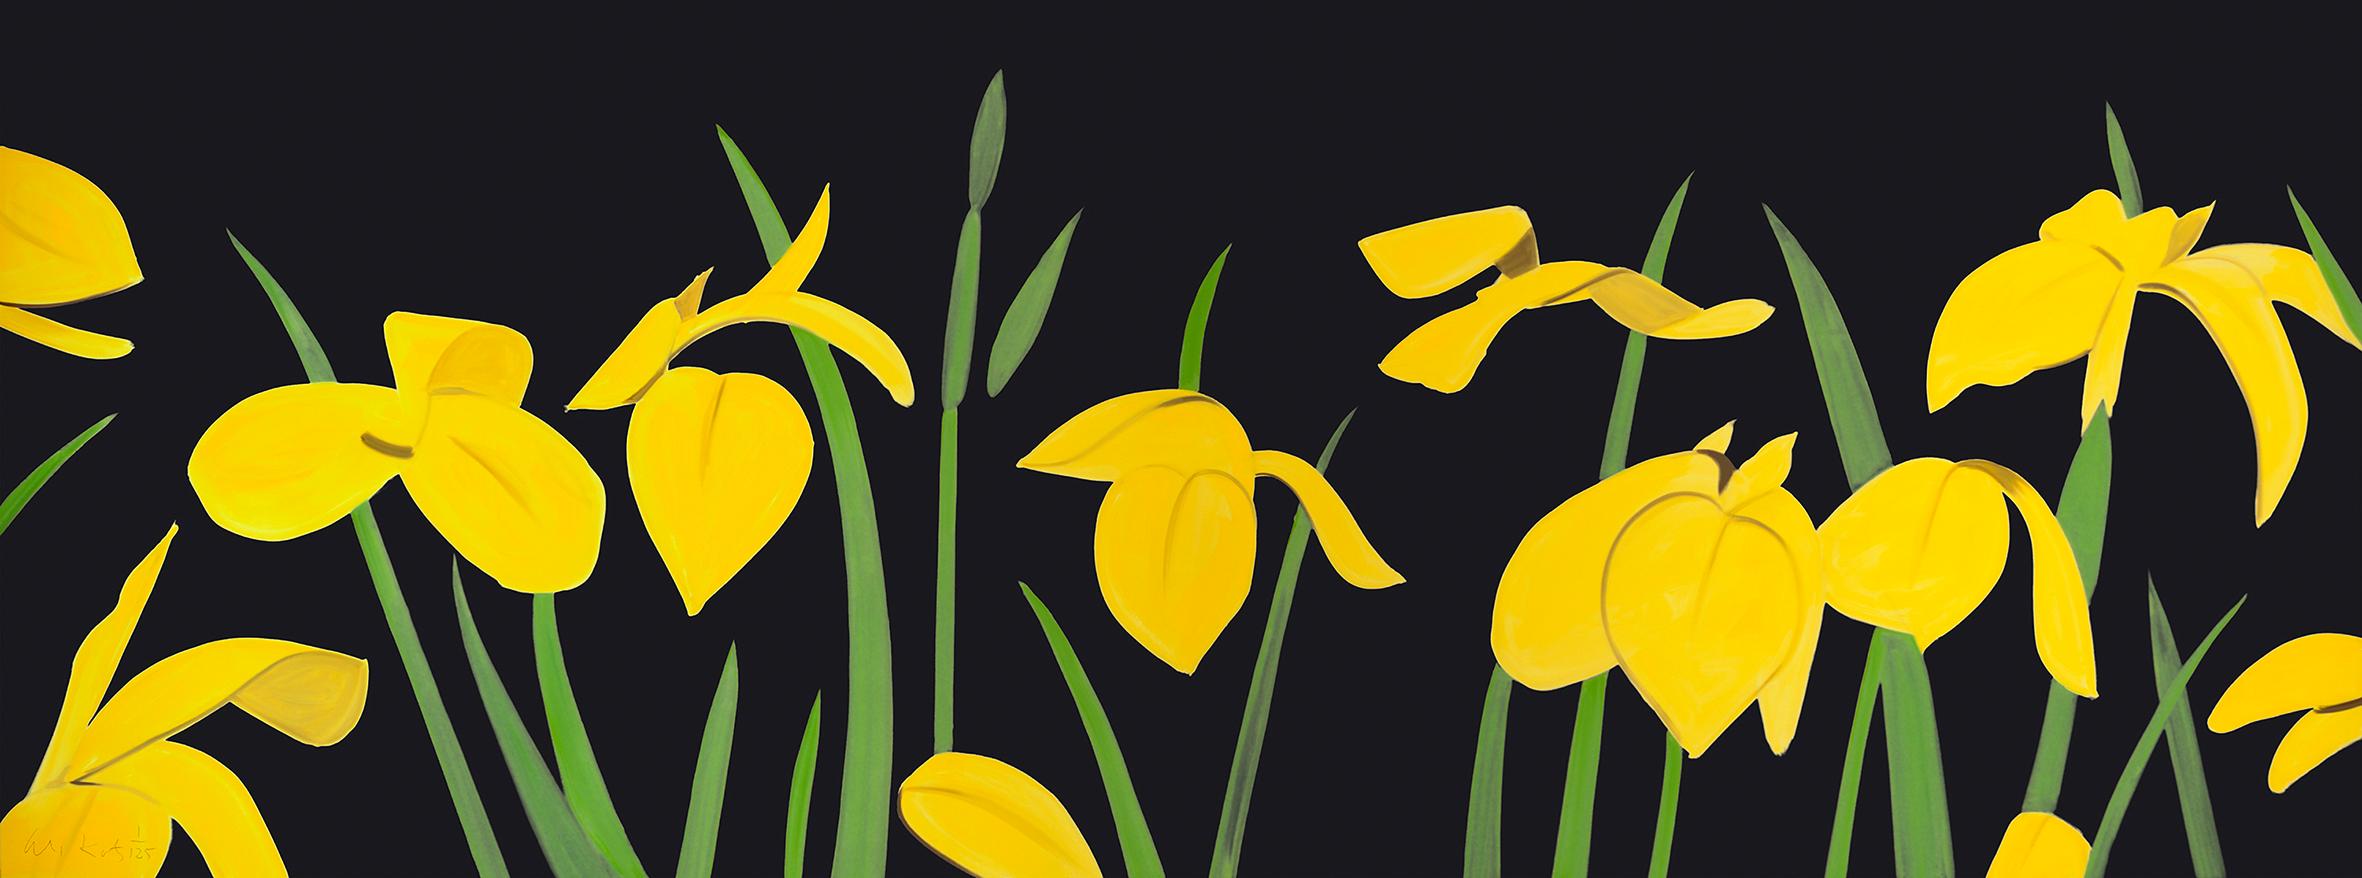 Yellow Flags 2 - 21st Century, Alex Katz Landscape Print, Black, Yellow, Flowers, 
"Yellow Flags 2" is one of Alex Katz's famous flower prints. His flowers are the most reduced forms of landscape paintings, which are a big part in his complete